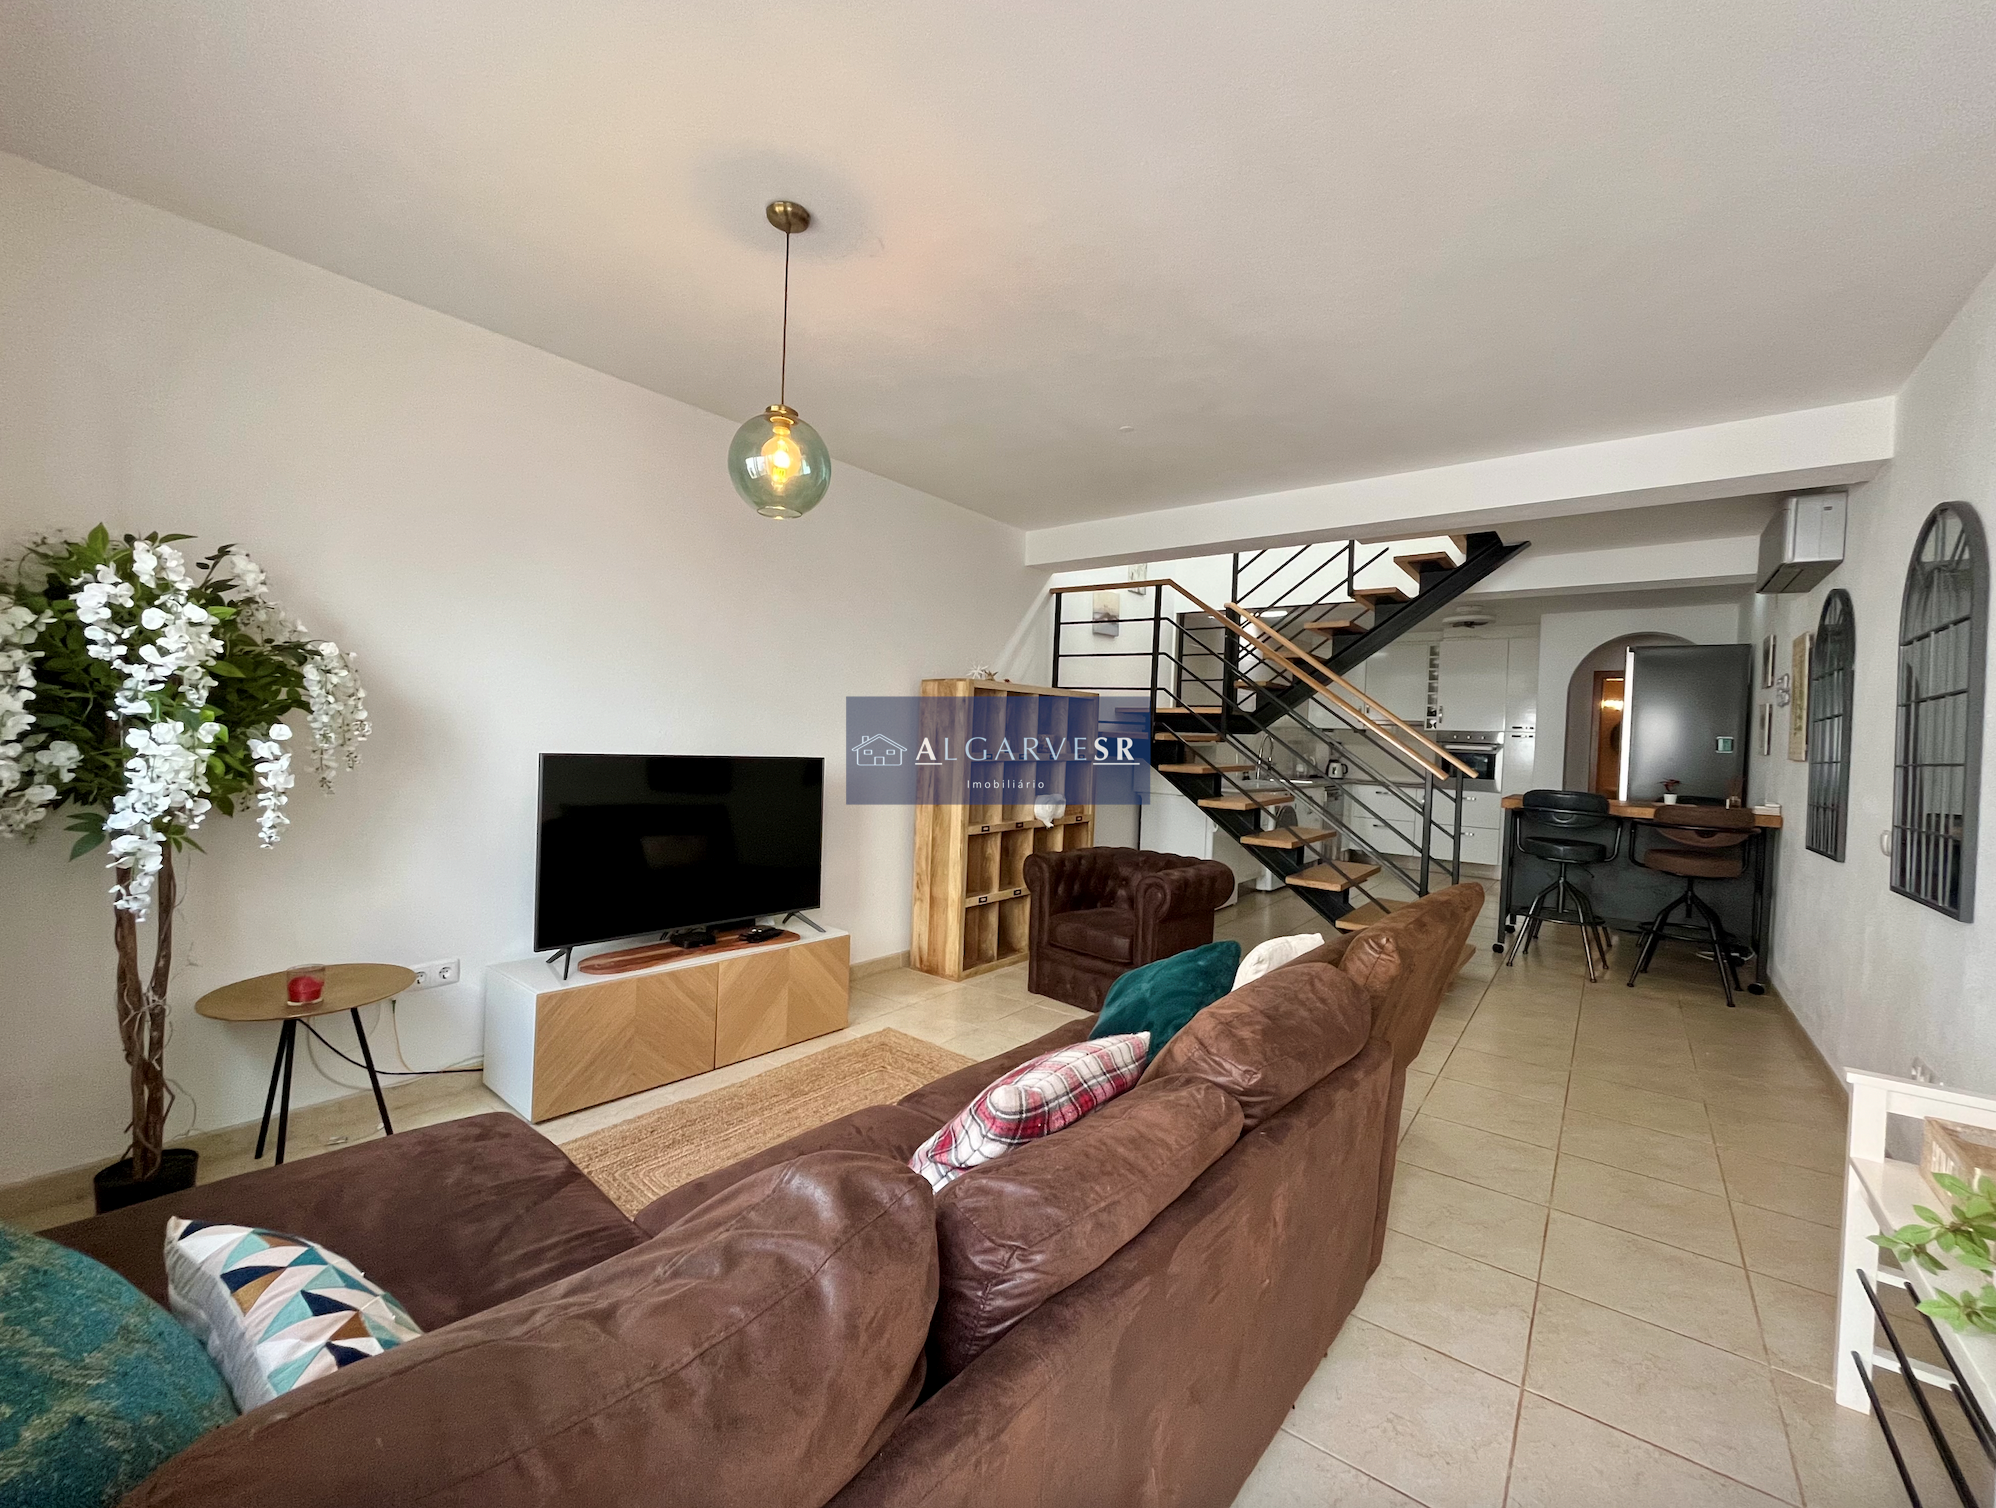 Fabulous traditional two bedroom townhouse, Silves centre